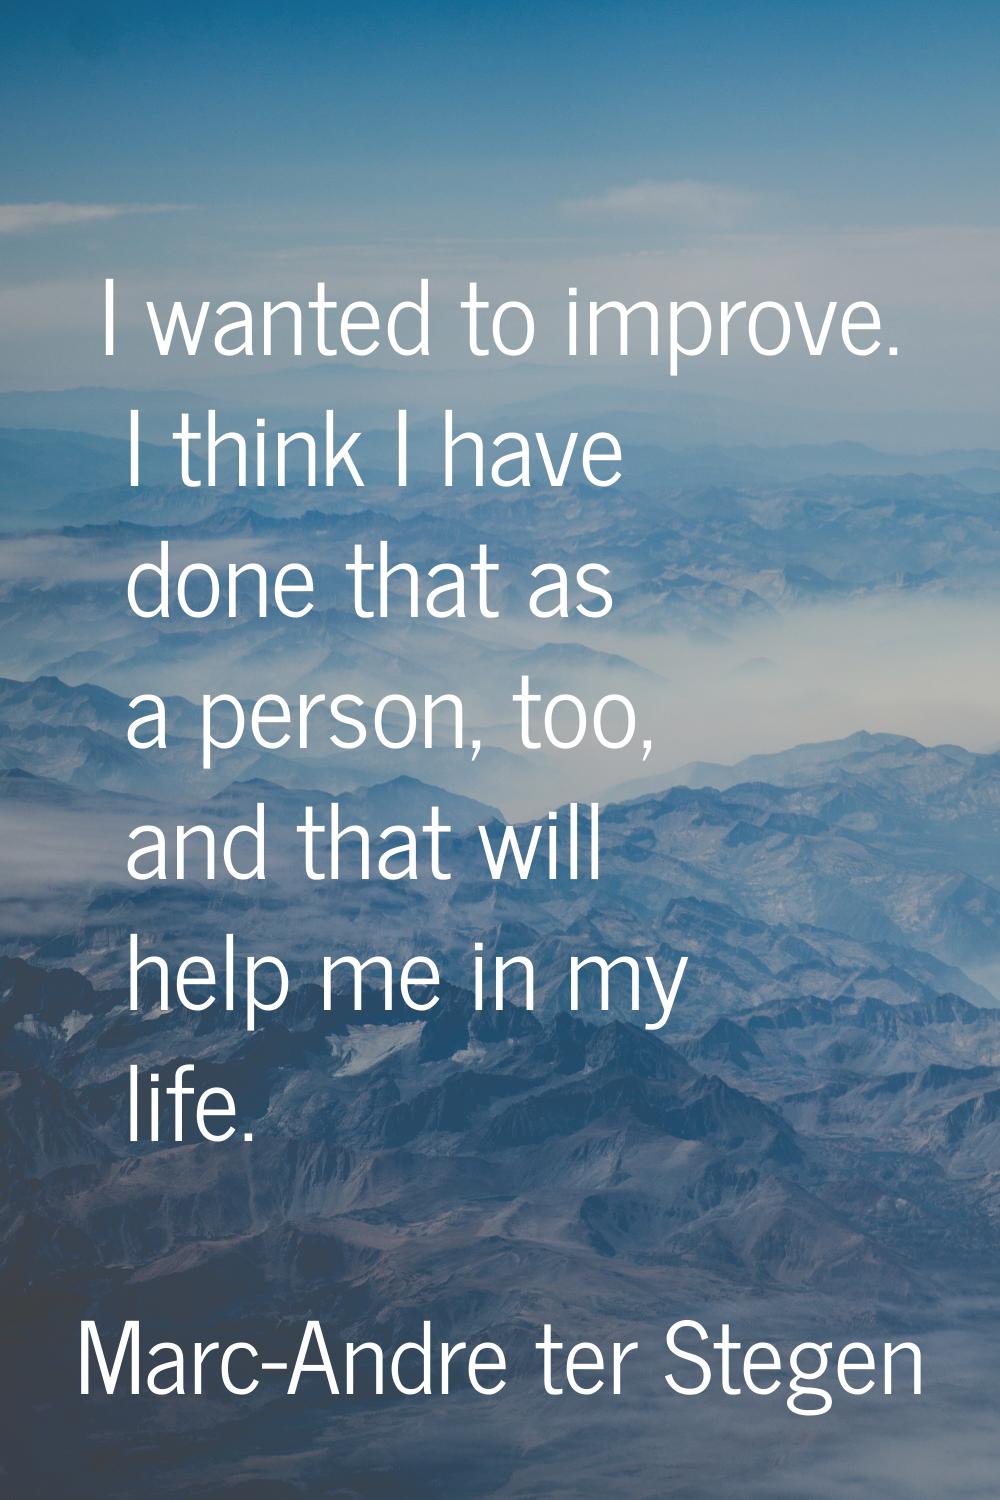 I wanted to improve. I think I have done that as a person, too, and that will help me in my life.